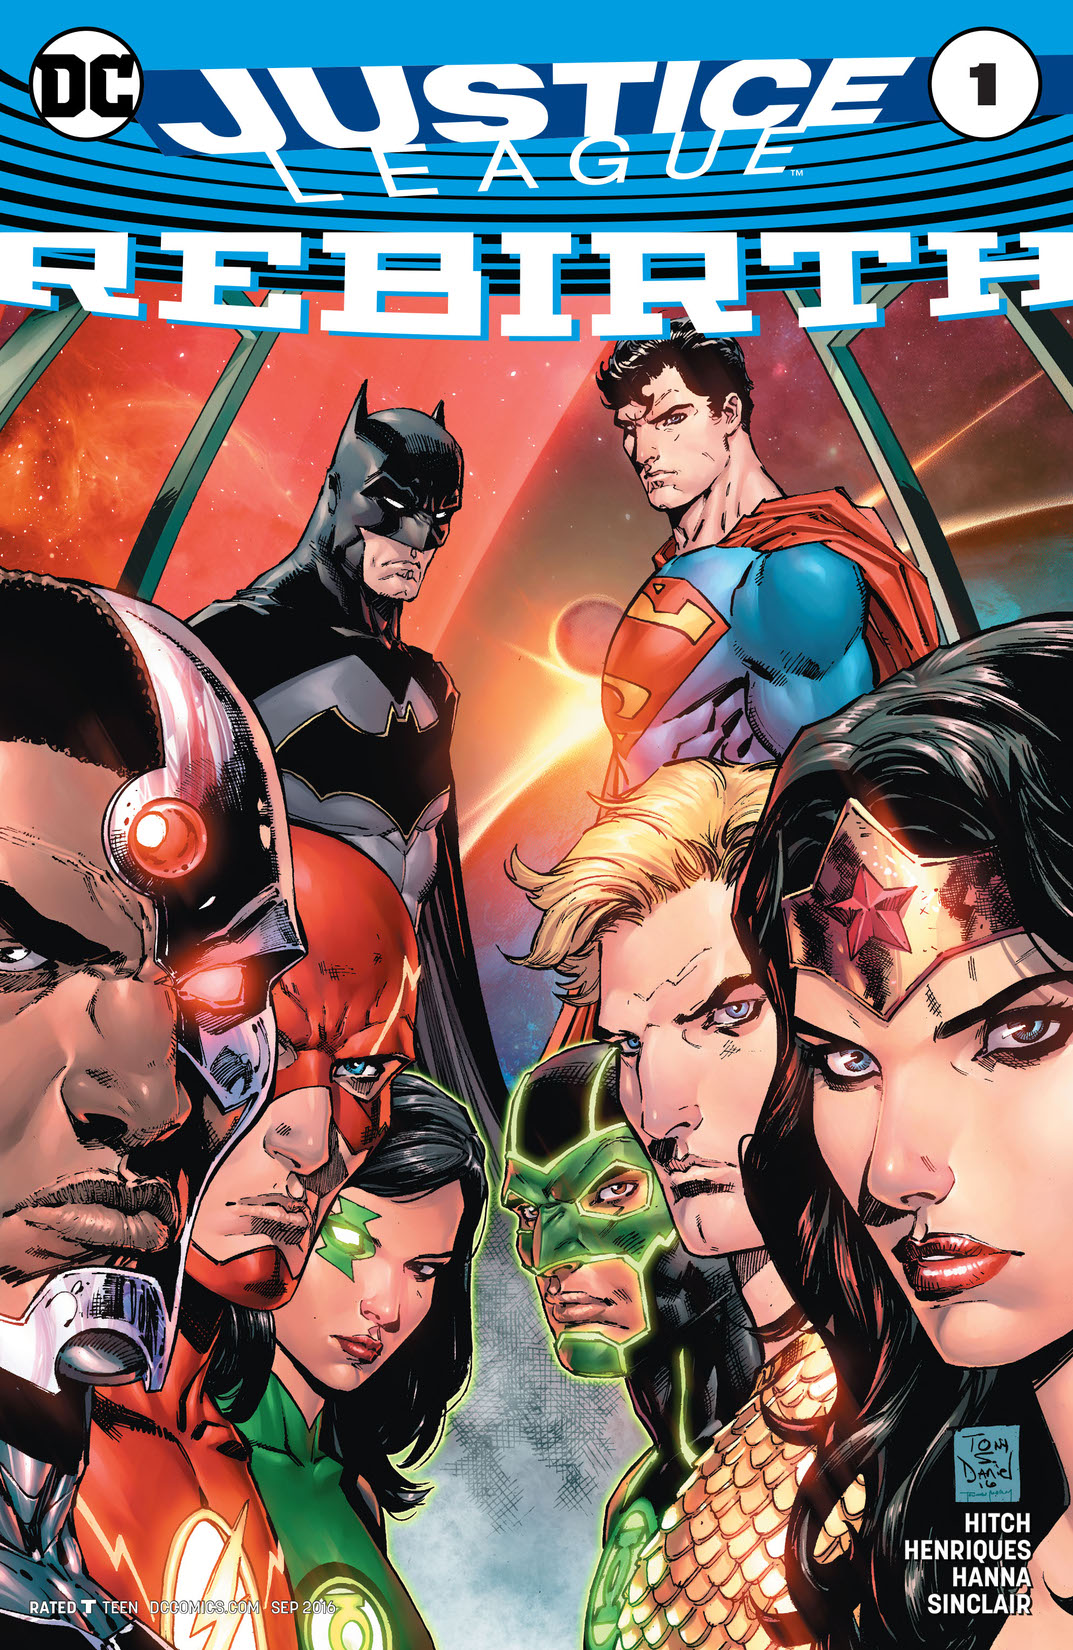 Justice League: Rebirth (2016-) #1 preview images